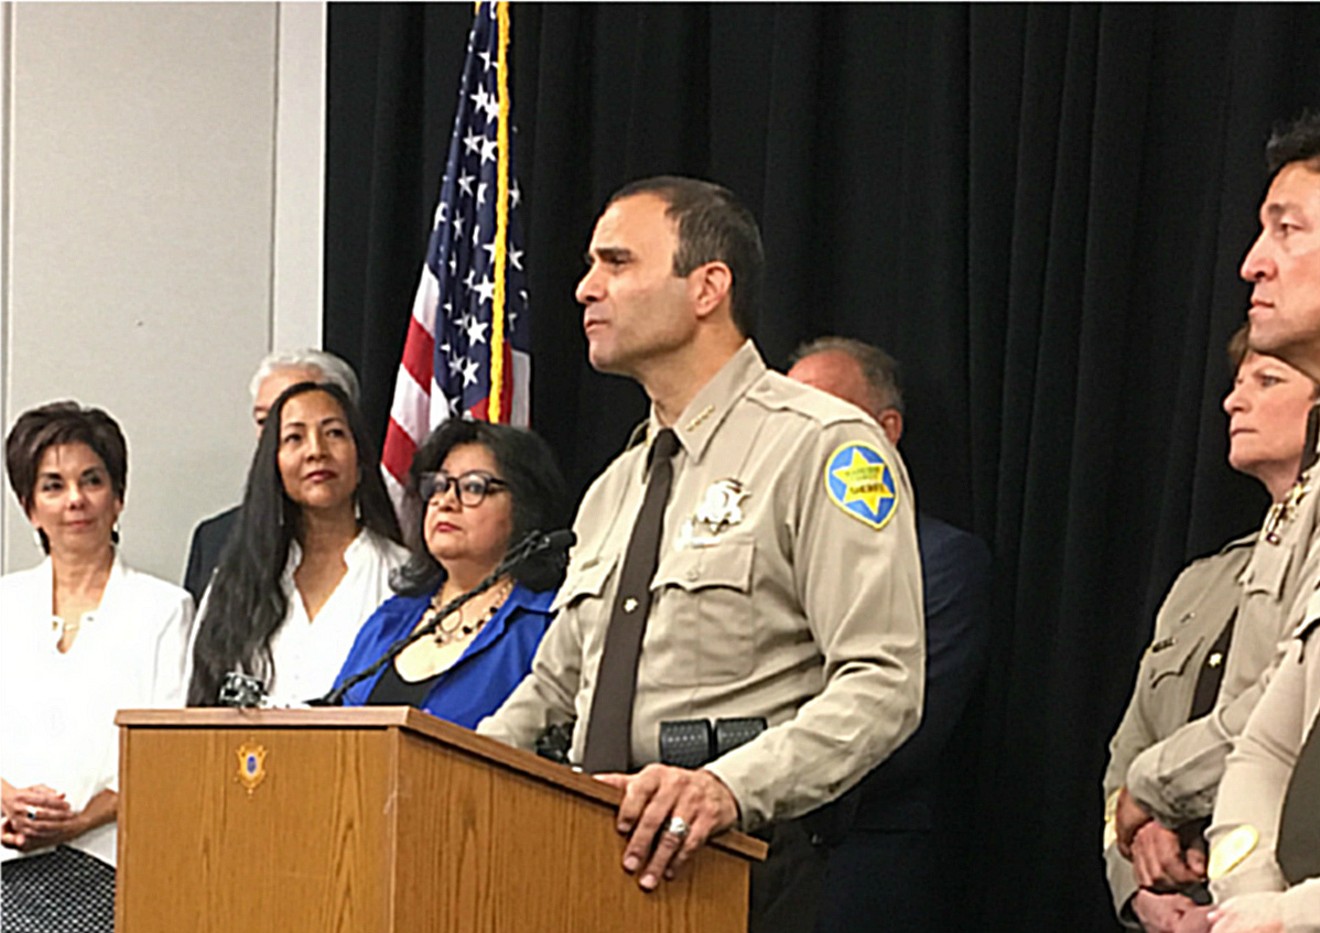 A new report shows that minorities were still treated differently by deputies last year despite the election of the new sheriff, Paul Penzone.